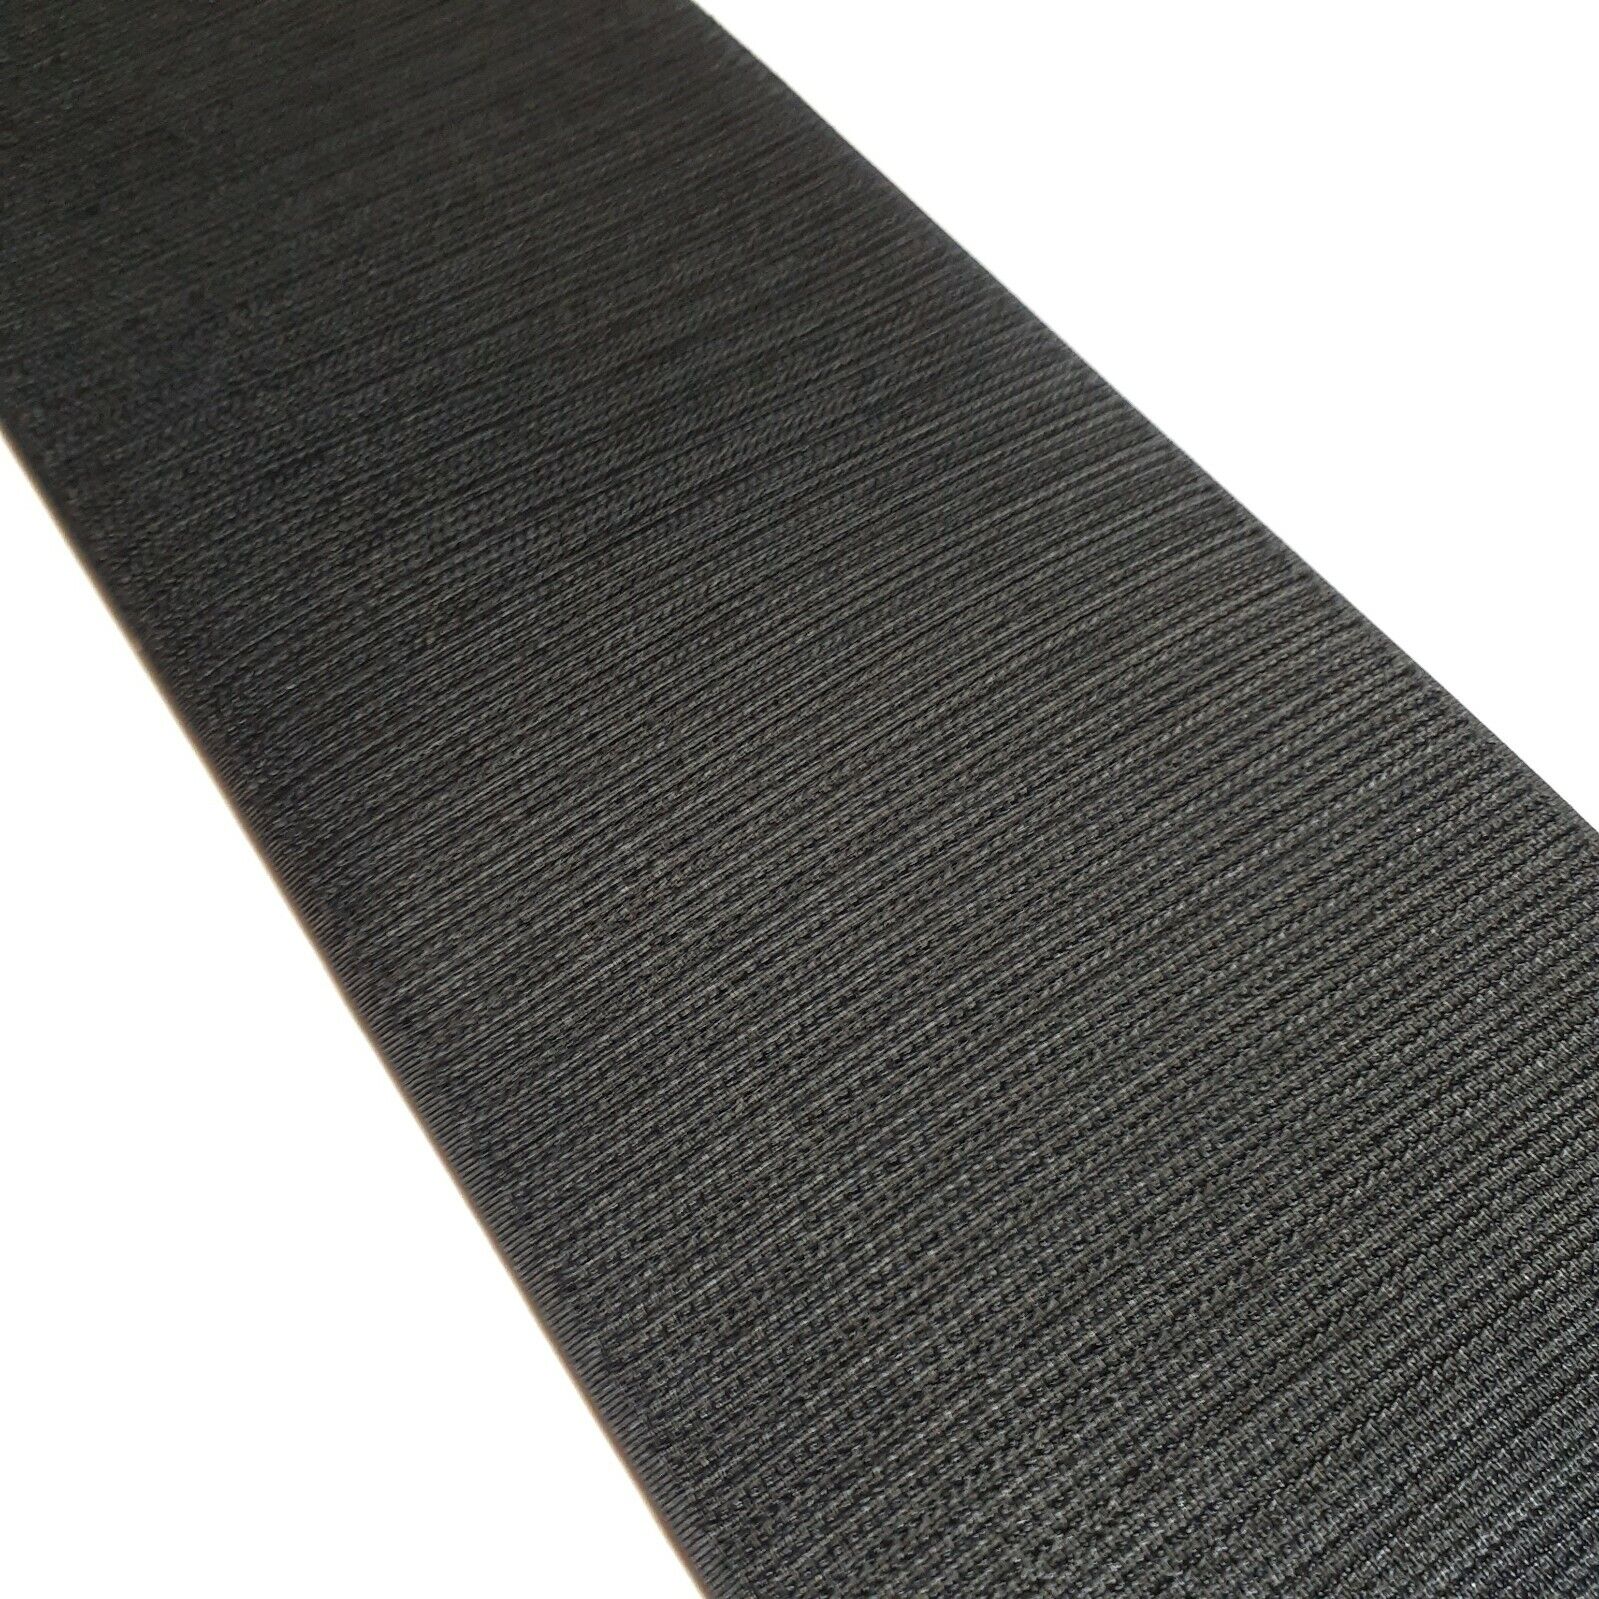 4" Wide VELCRO® Brand Hook Side Only - Sew-On Type - 24" inches - Uncut